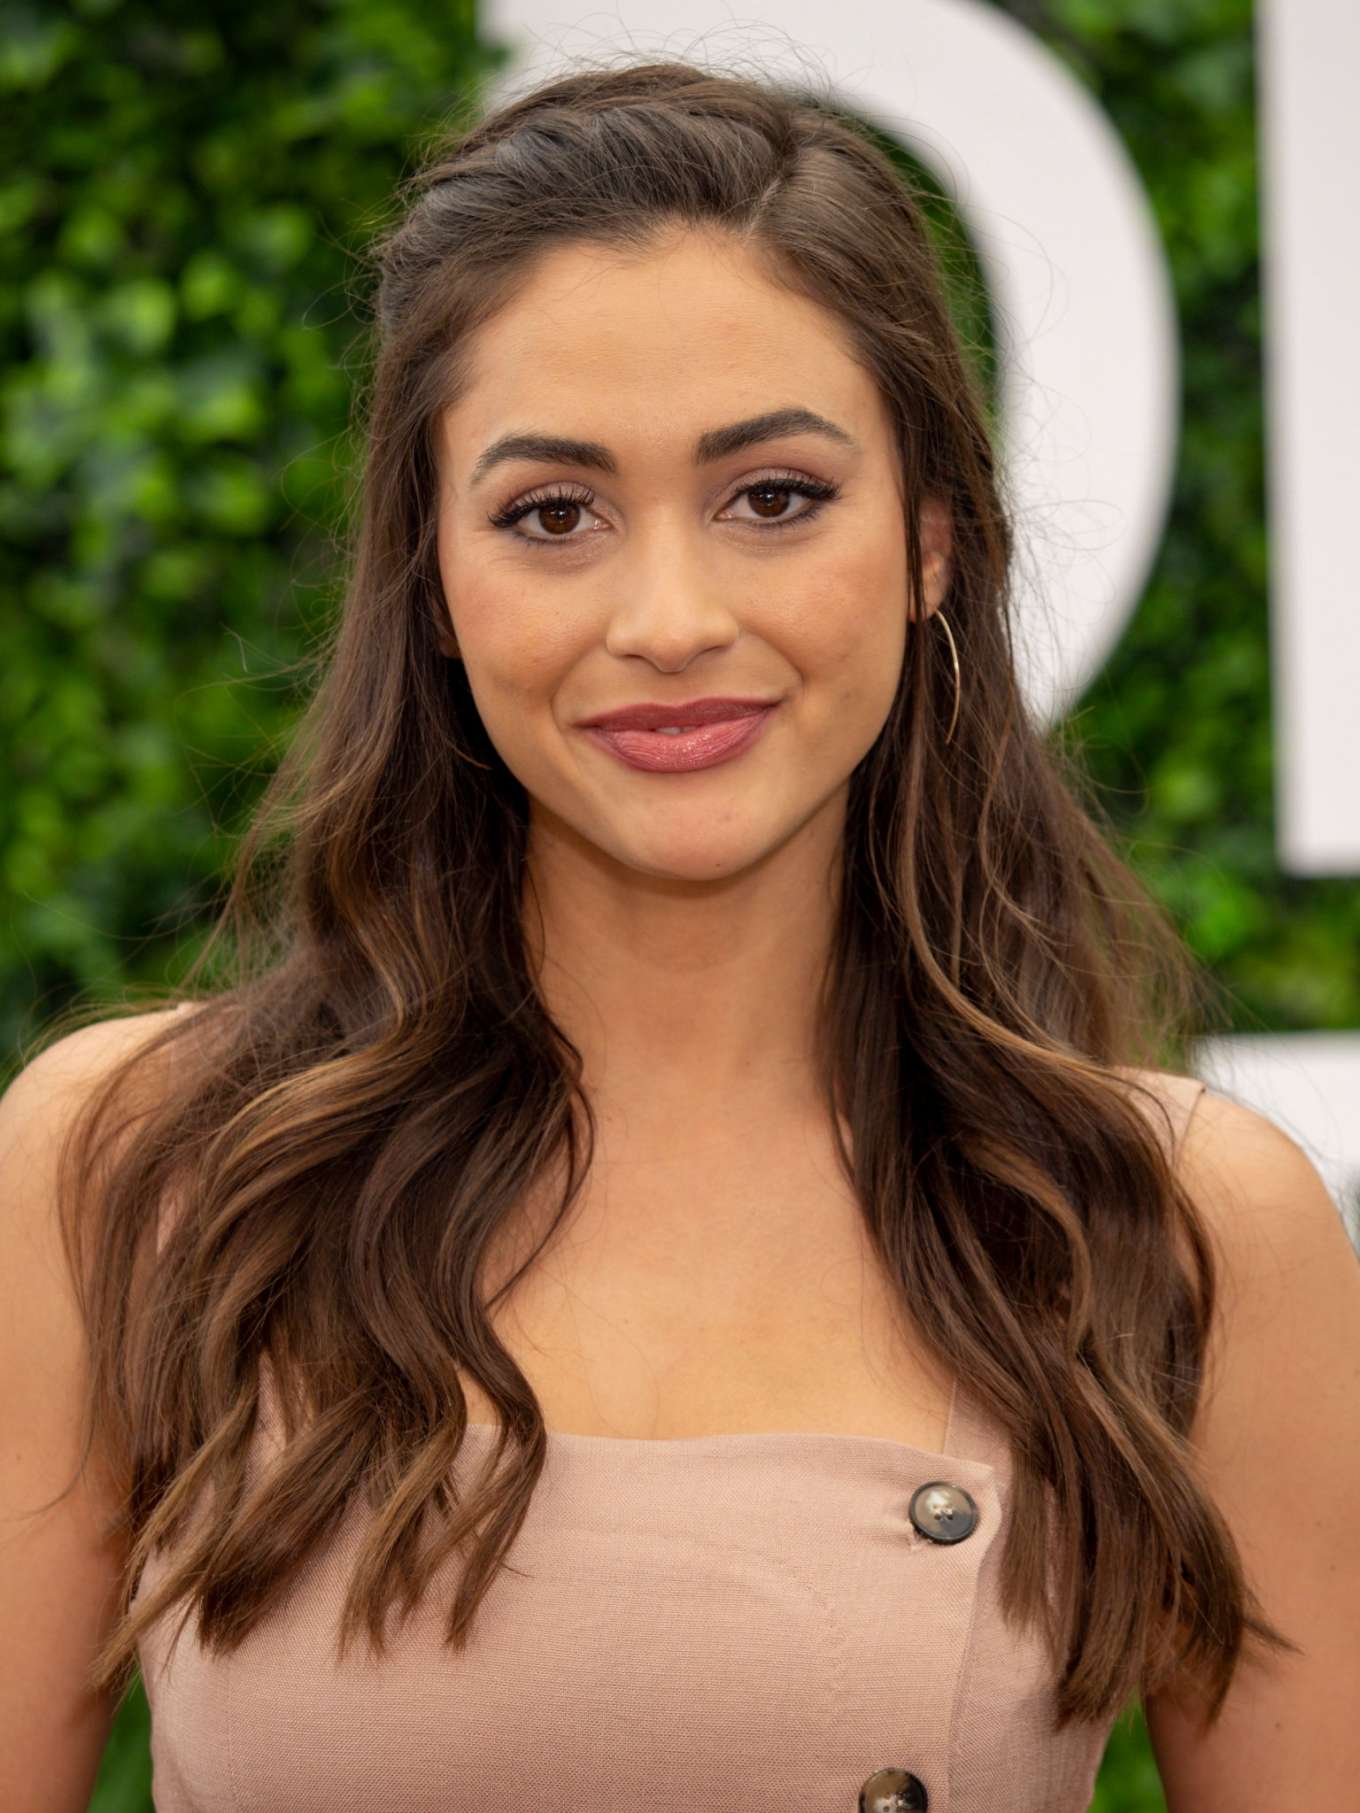 Abe S Words Lindsey Morgan Abe S Words Beauty Of The Month May 2021